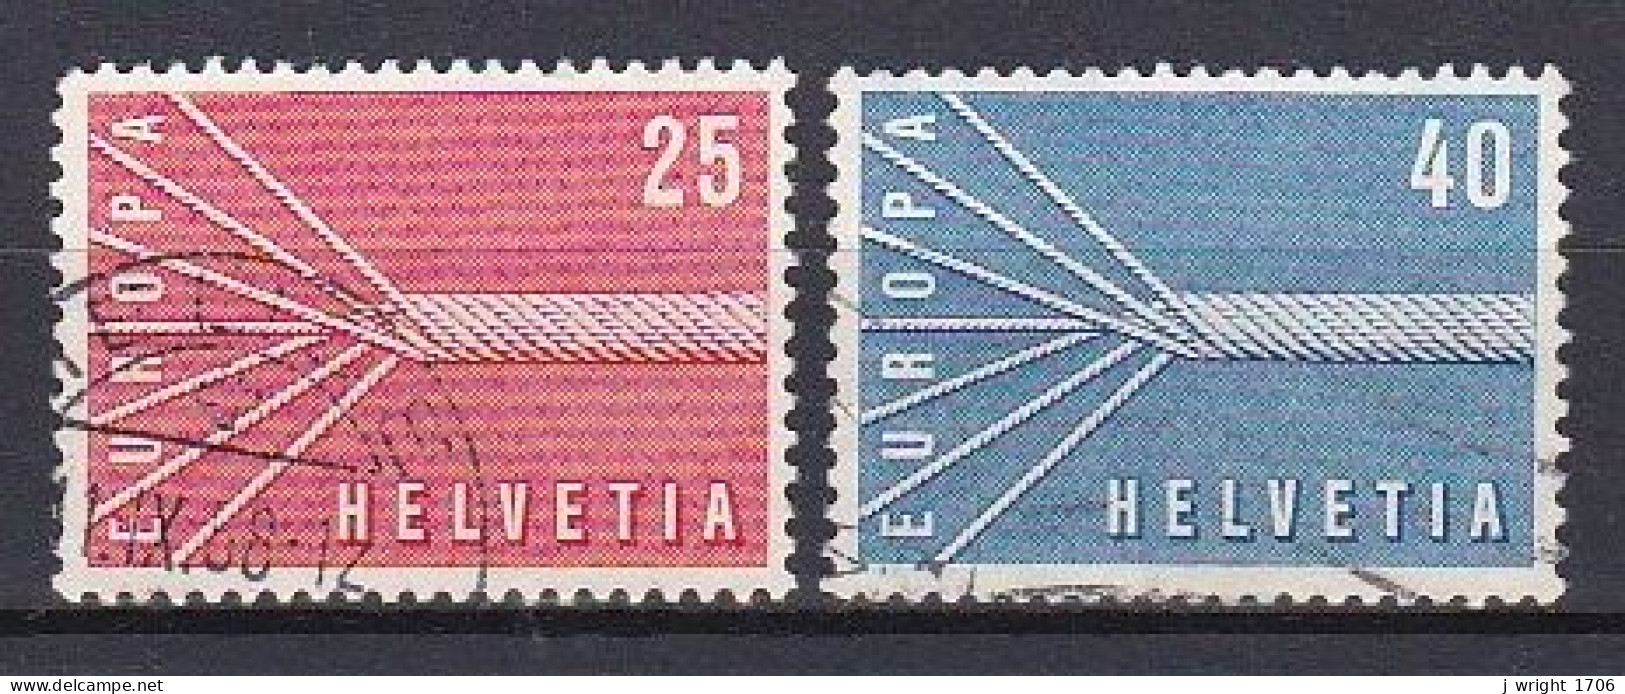 Switzerland, 1957, Europa CEPT, Set, USED - Used Stamps